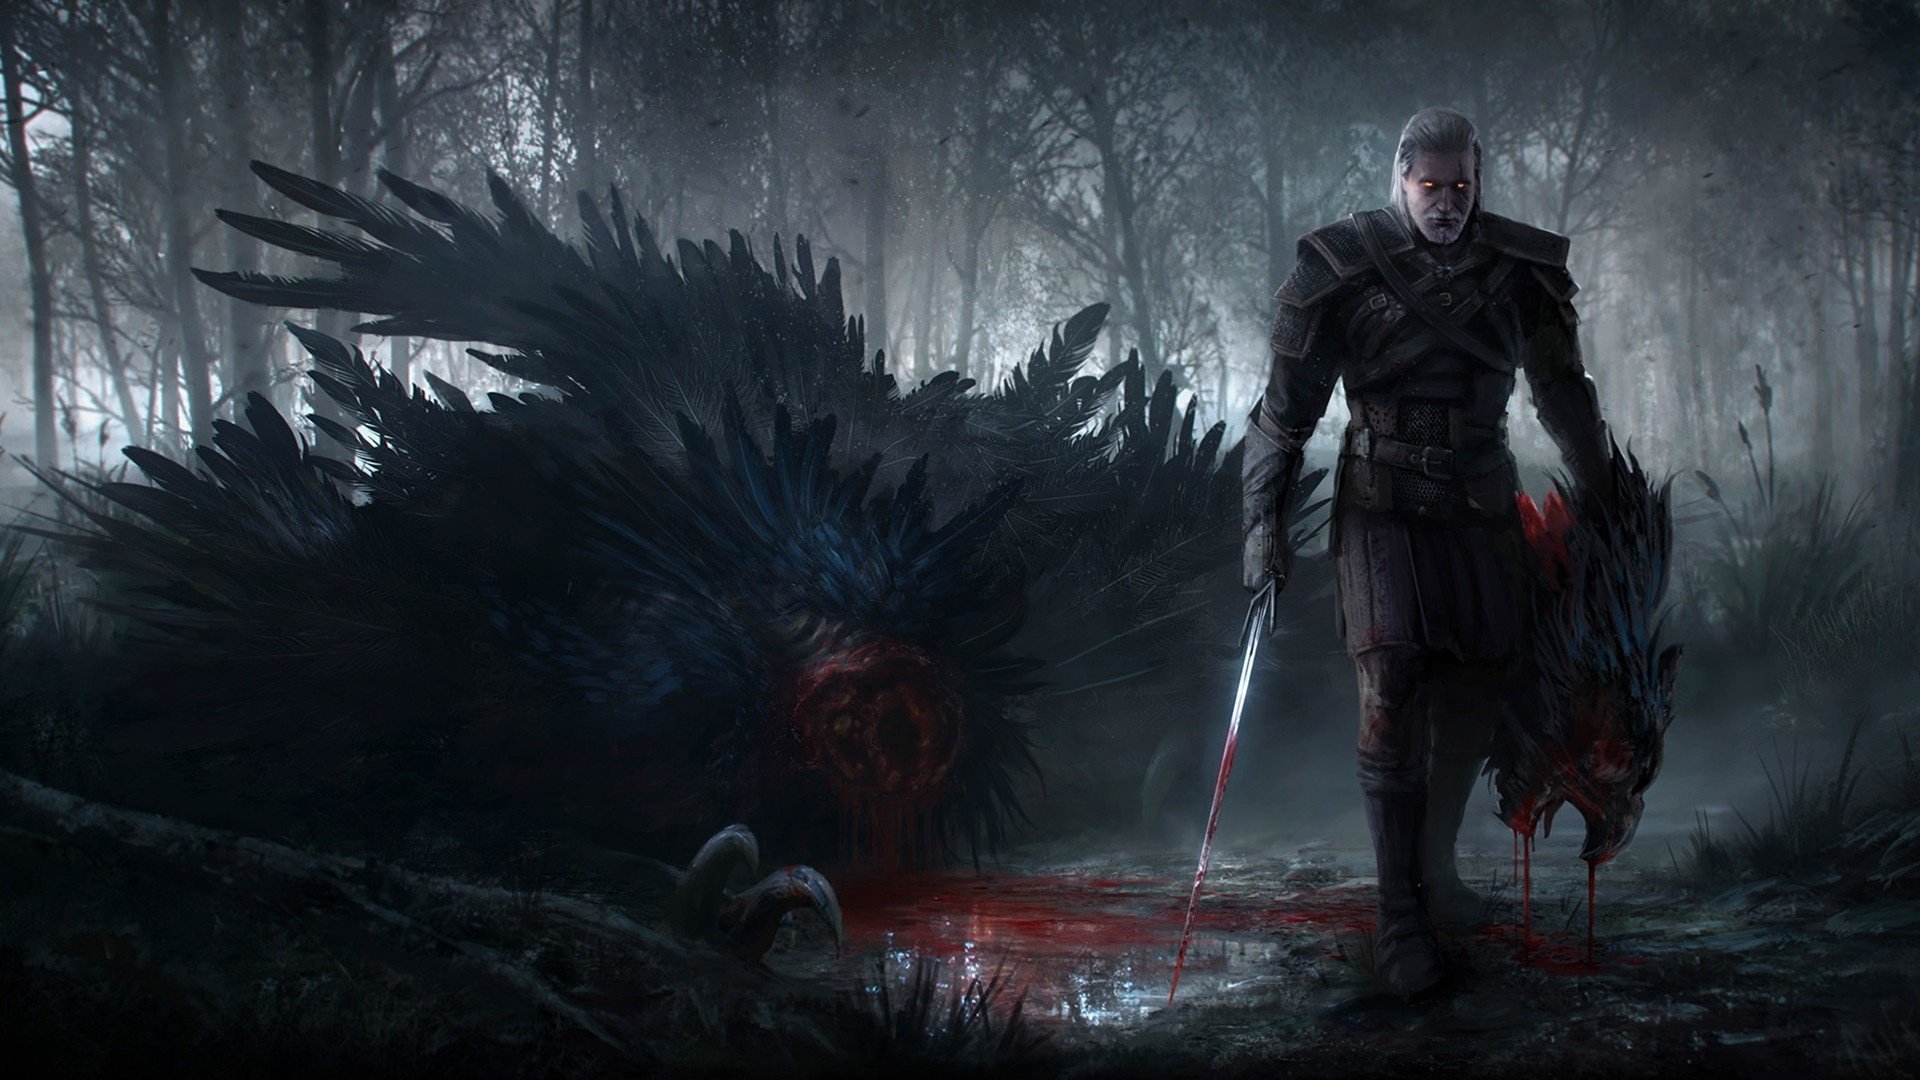 General 1920x1080 creature fantasy art The Witcher 3: Wild Hunt video game art blood video games sword glowing eyes Geralt of Rivia